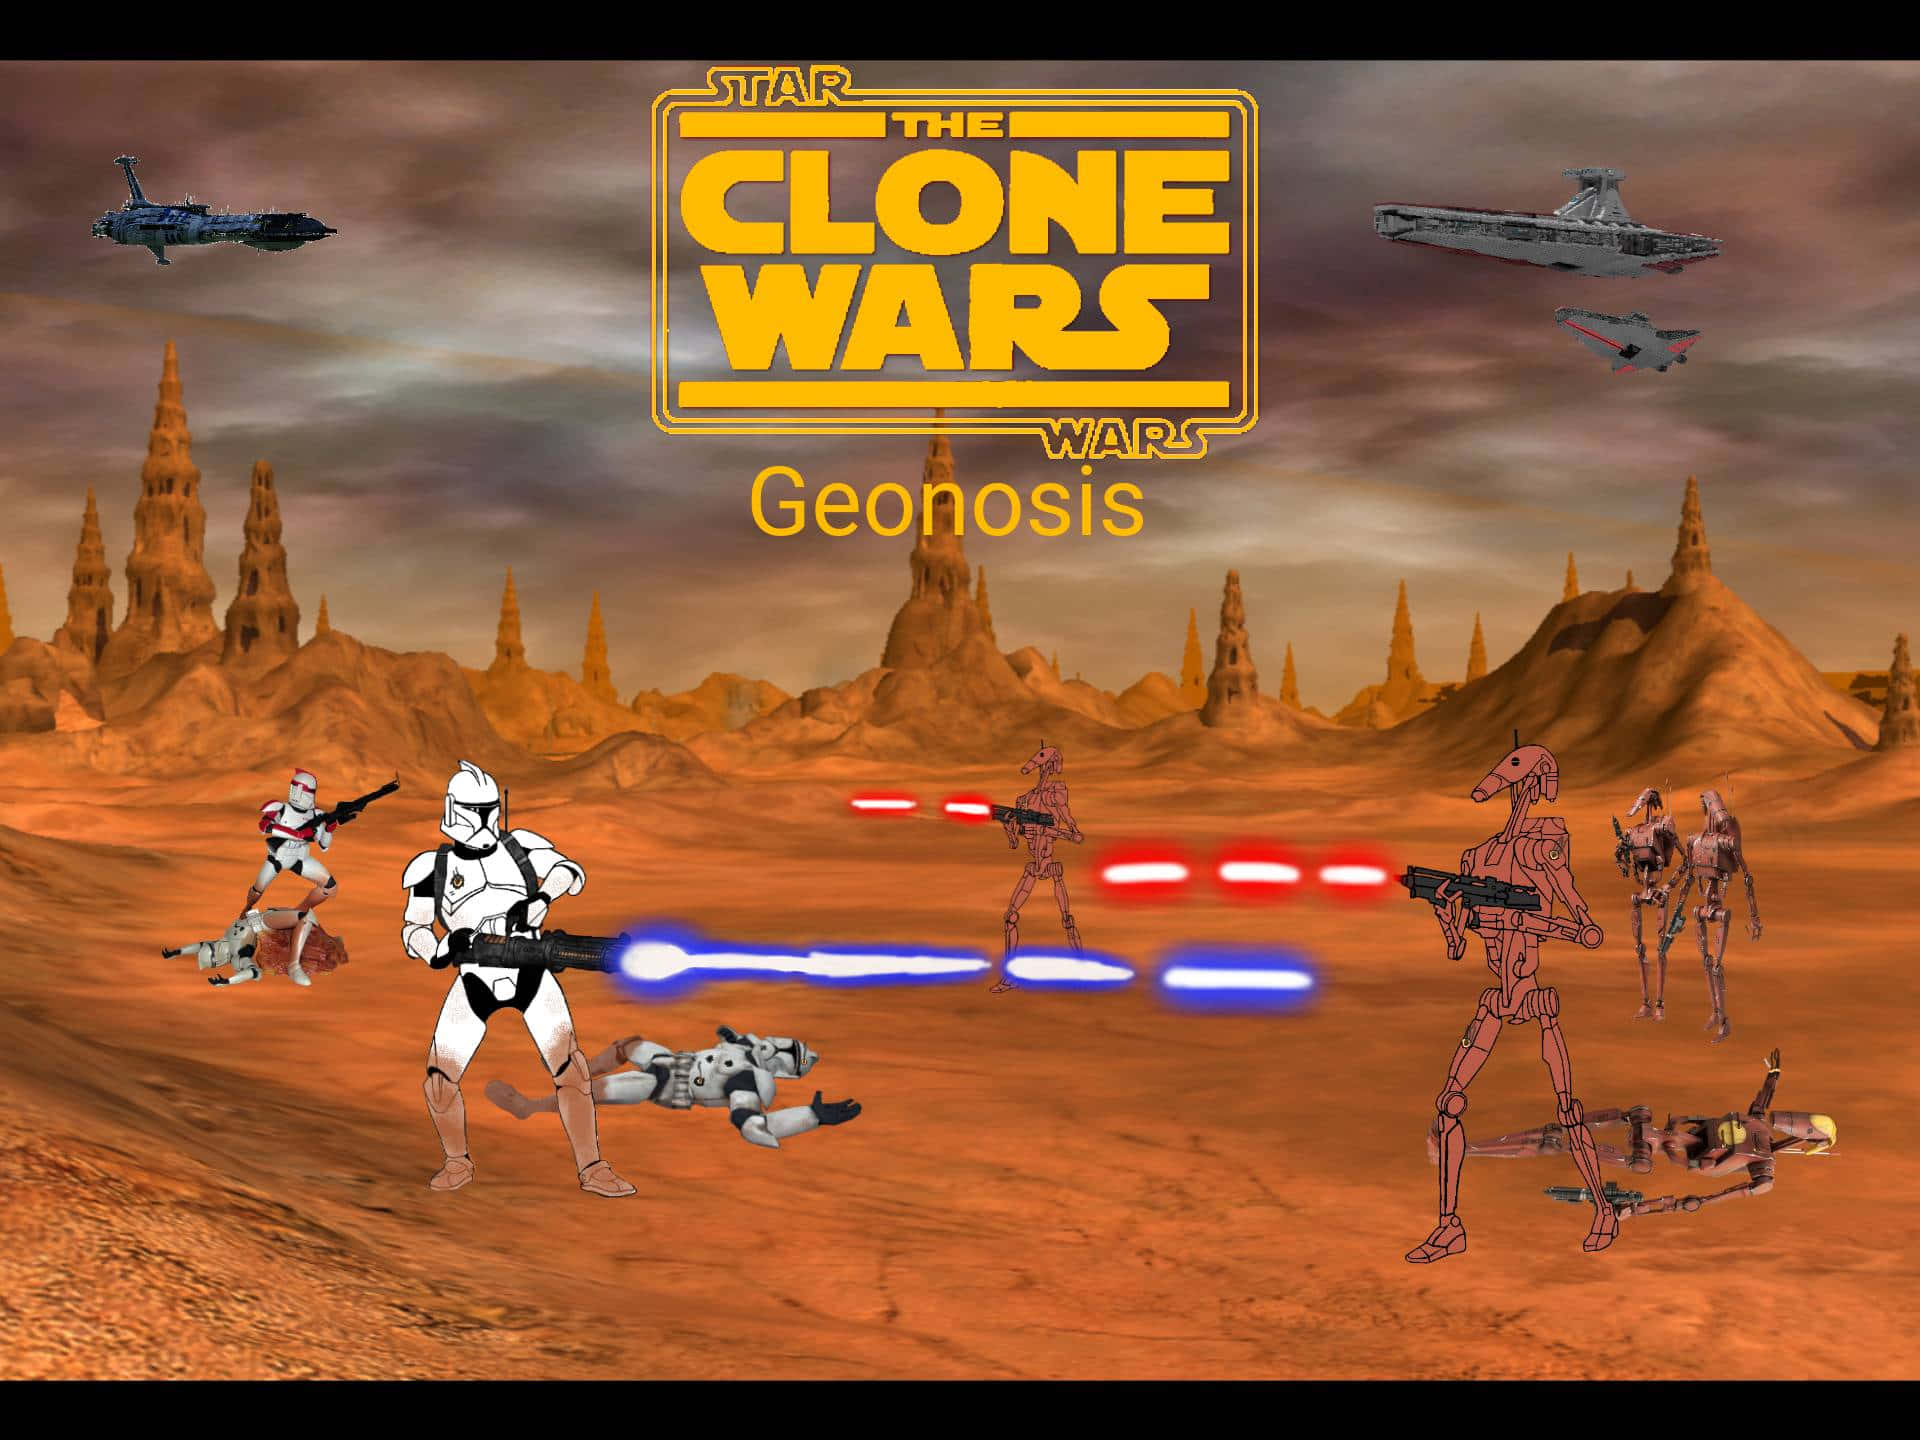 Droids fight for the Separatists in The Battle of Geonosis Wallpaper